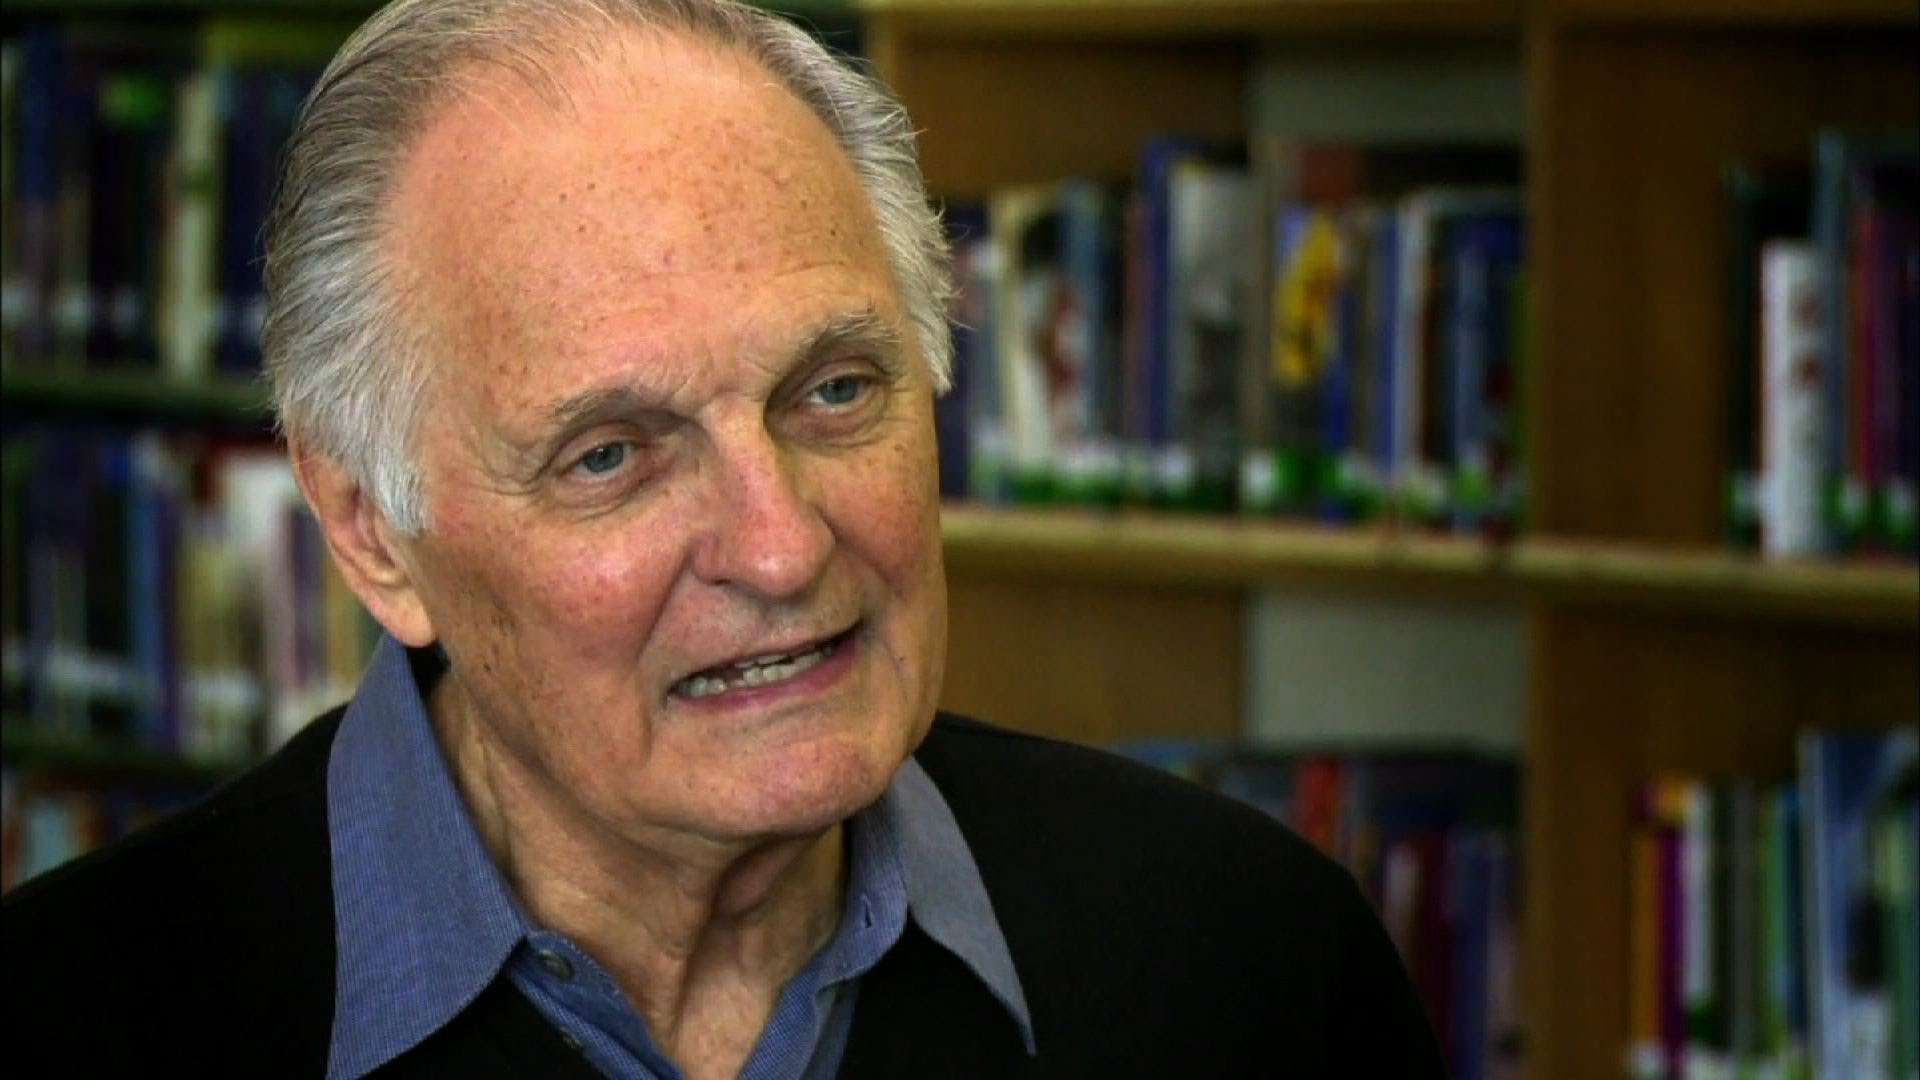 Alan Alda Wallpapers Images Photos Pictures Backgrounds1920 x 1080